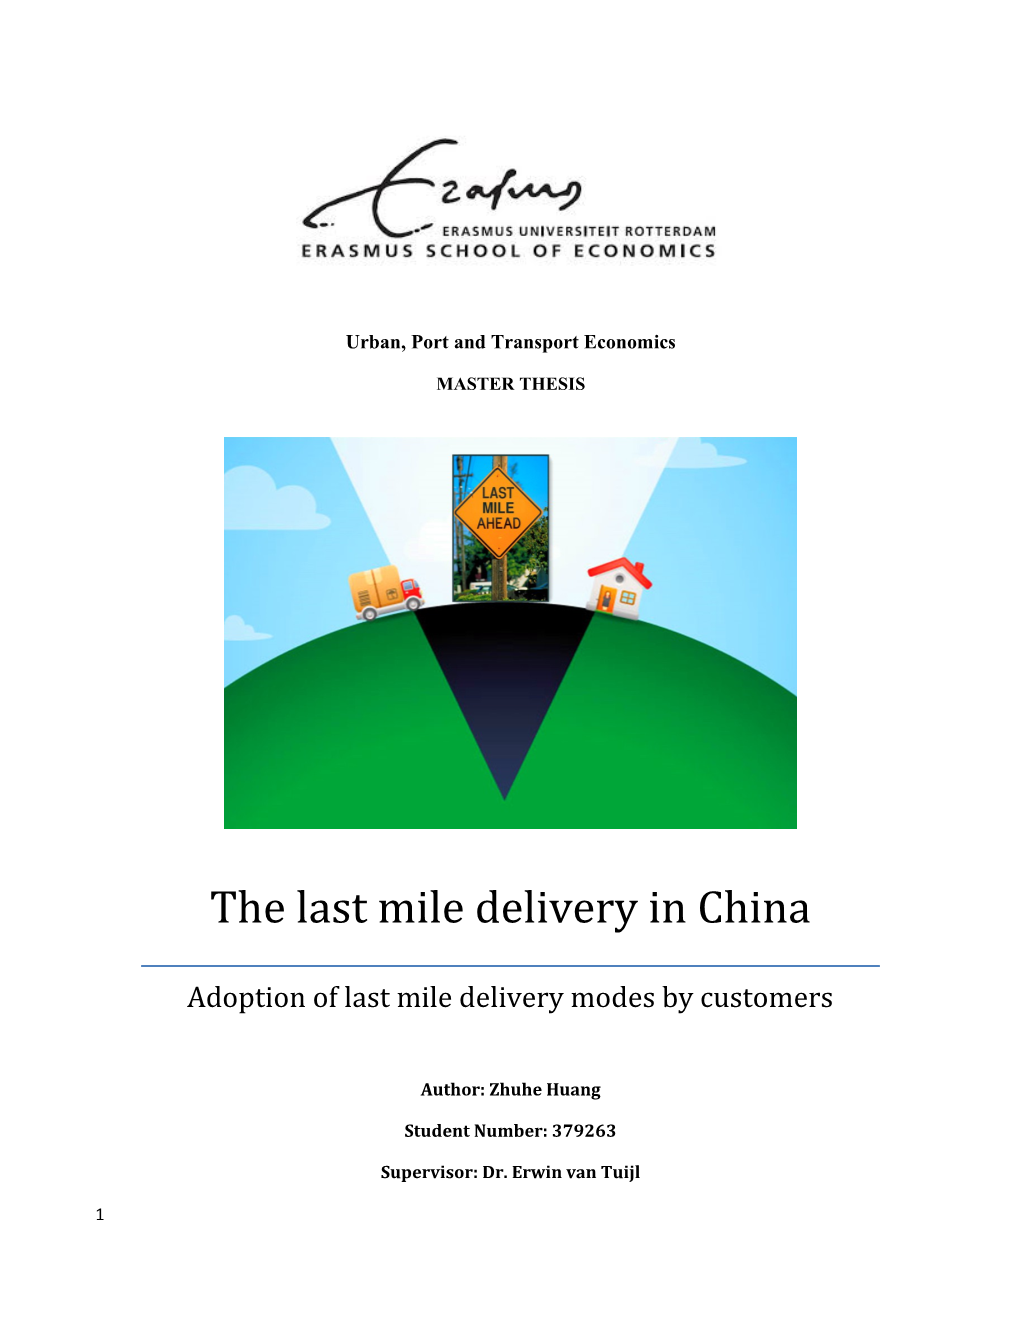 The Last Mile Delivery in China